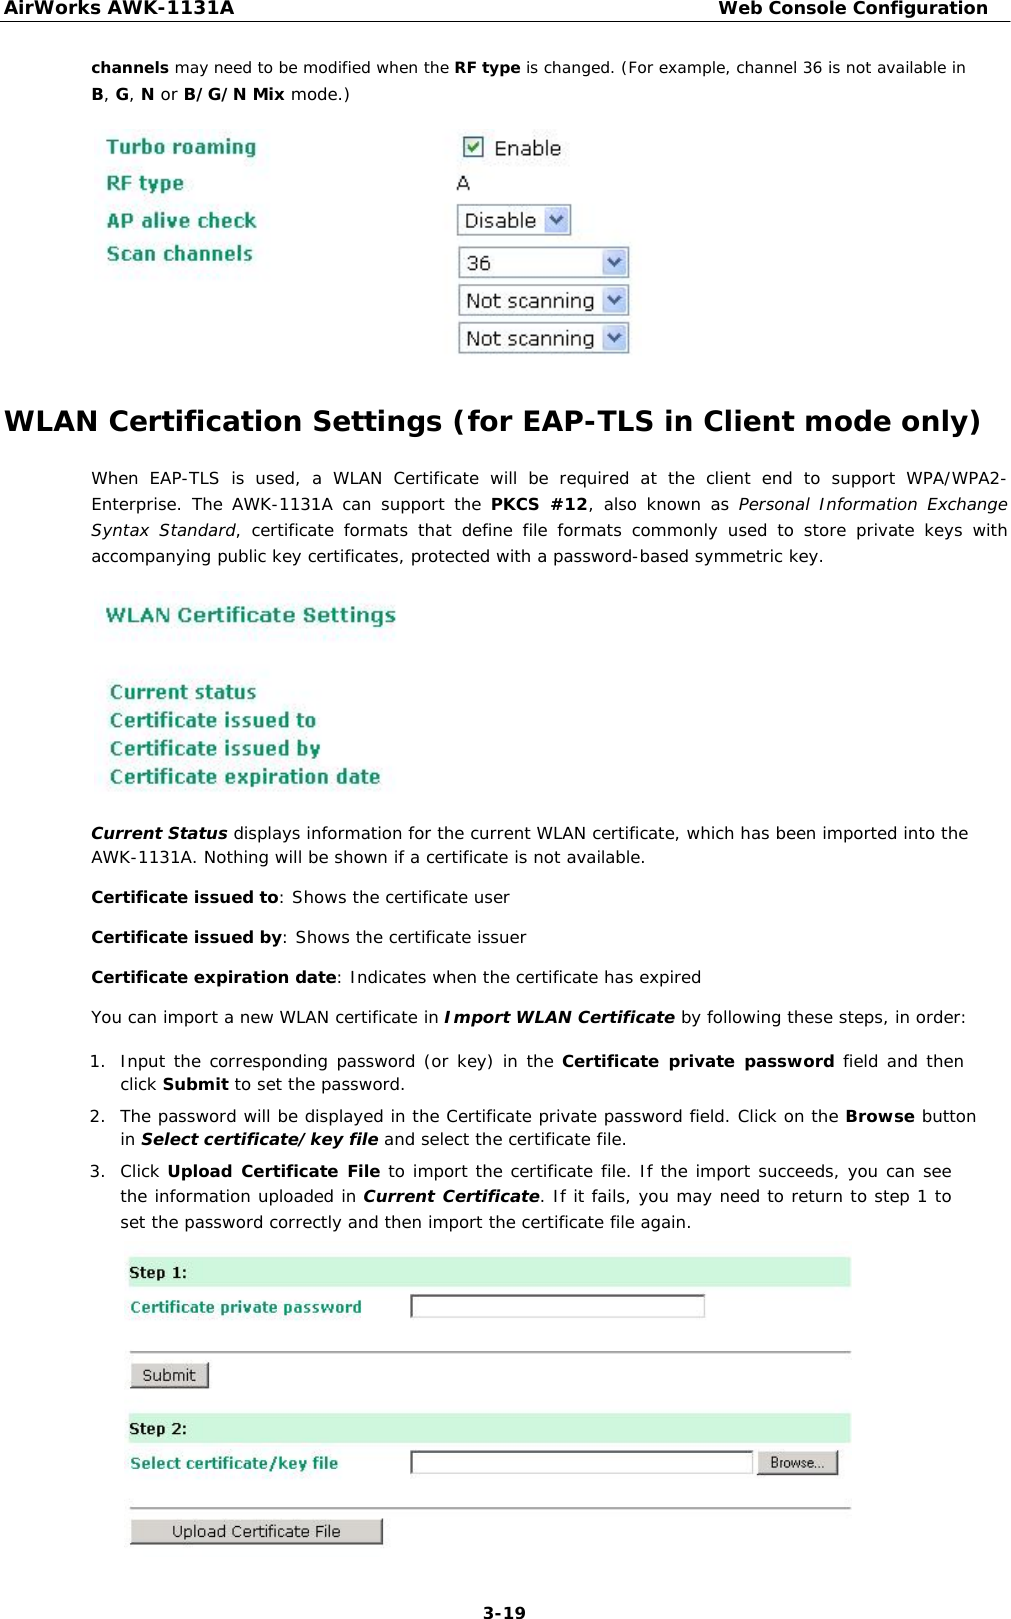 AirWorks AWK-1131A Web Console Configuration  channels may need to be modified when the RF type is changed. (For example, channel 36 is not available in  B, G, N or B/G/N Mix mode.)               WLAN Certification Settings (for EAP-TLS in Client mode only)  When EAP-TLS is used, a WLAN Certificate will be required at the client end to support WPA/WPA2-Enterprise. The AWK-1131A can support the PKCS #12, also known as Personal Information Exchange Syntax Standard, certificate formats that define file formats commonly used to store private keys with accompanying public key certificates, protected with a password-based symmetric key.             Current Status displays information for the current WLAN certificate, which has been imported into the AWK-1131A. Nothing will be shown if a certificate is not available.  Certificate issued to: Shows the certificate user  Certificate issued by: Shows the certificate issuer  Certificate expiration date: Indicates when the certificate has expired  You can import a new WLAN certificate in Import WLAN Certificate by following these steps, in order:  1. Input the corresponding password (or key) in the Certificate private password field and then click Submit to set the password.   2. The password will be displayed in the Certificate private password field. Click on the Browse button in Select certificate/key file and select the certificate file.   3. Click Upload Certificate File to import the certificate file. If the import succeeds, you can see the information uploaded in Current Certificate. If it fails, you may need to return to step 1 to set the password correctly and then import the certificate file again.                   3-19 